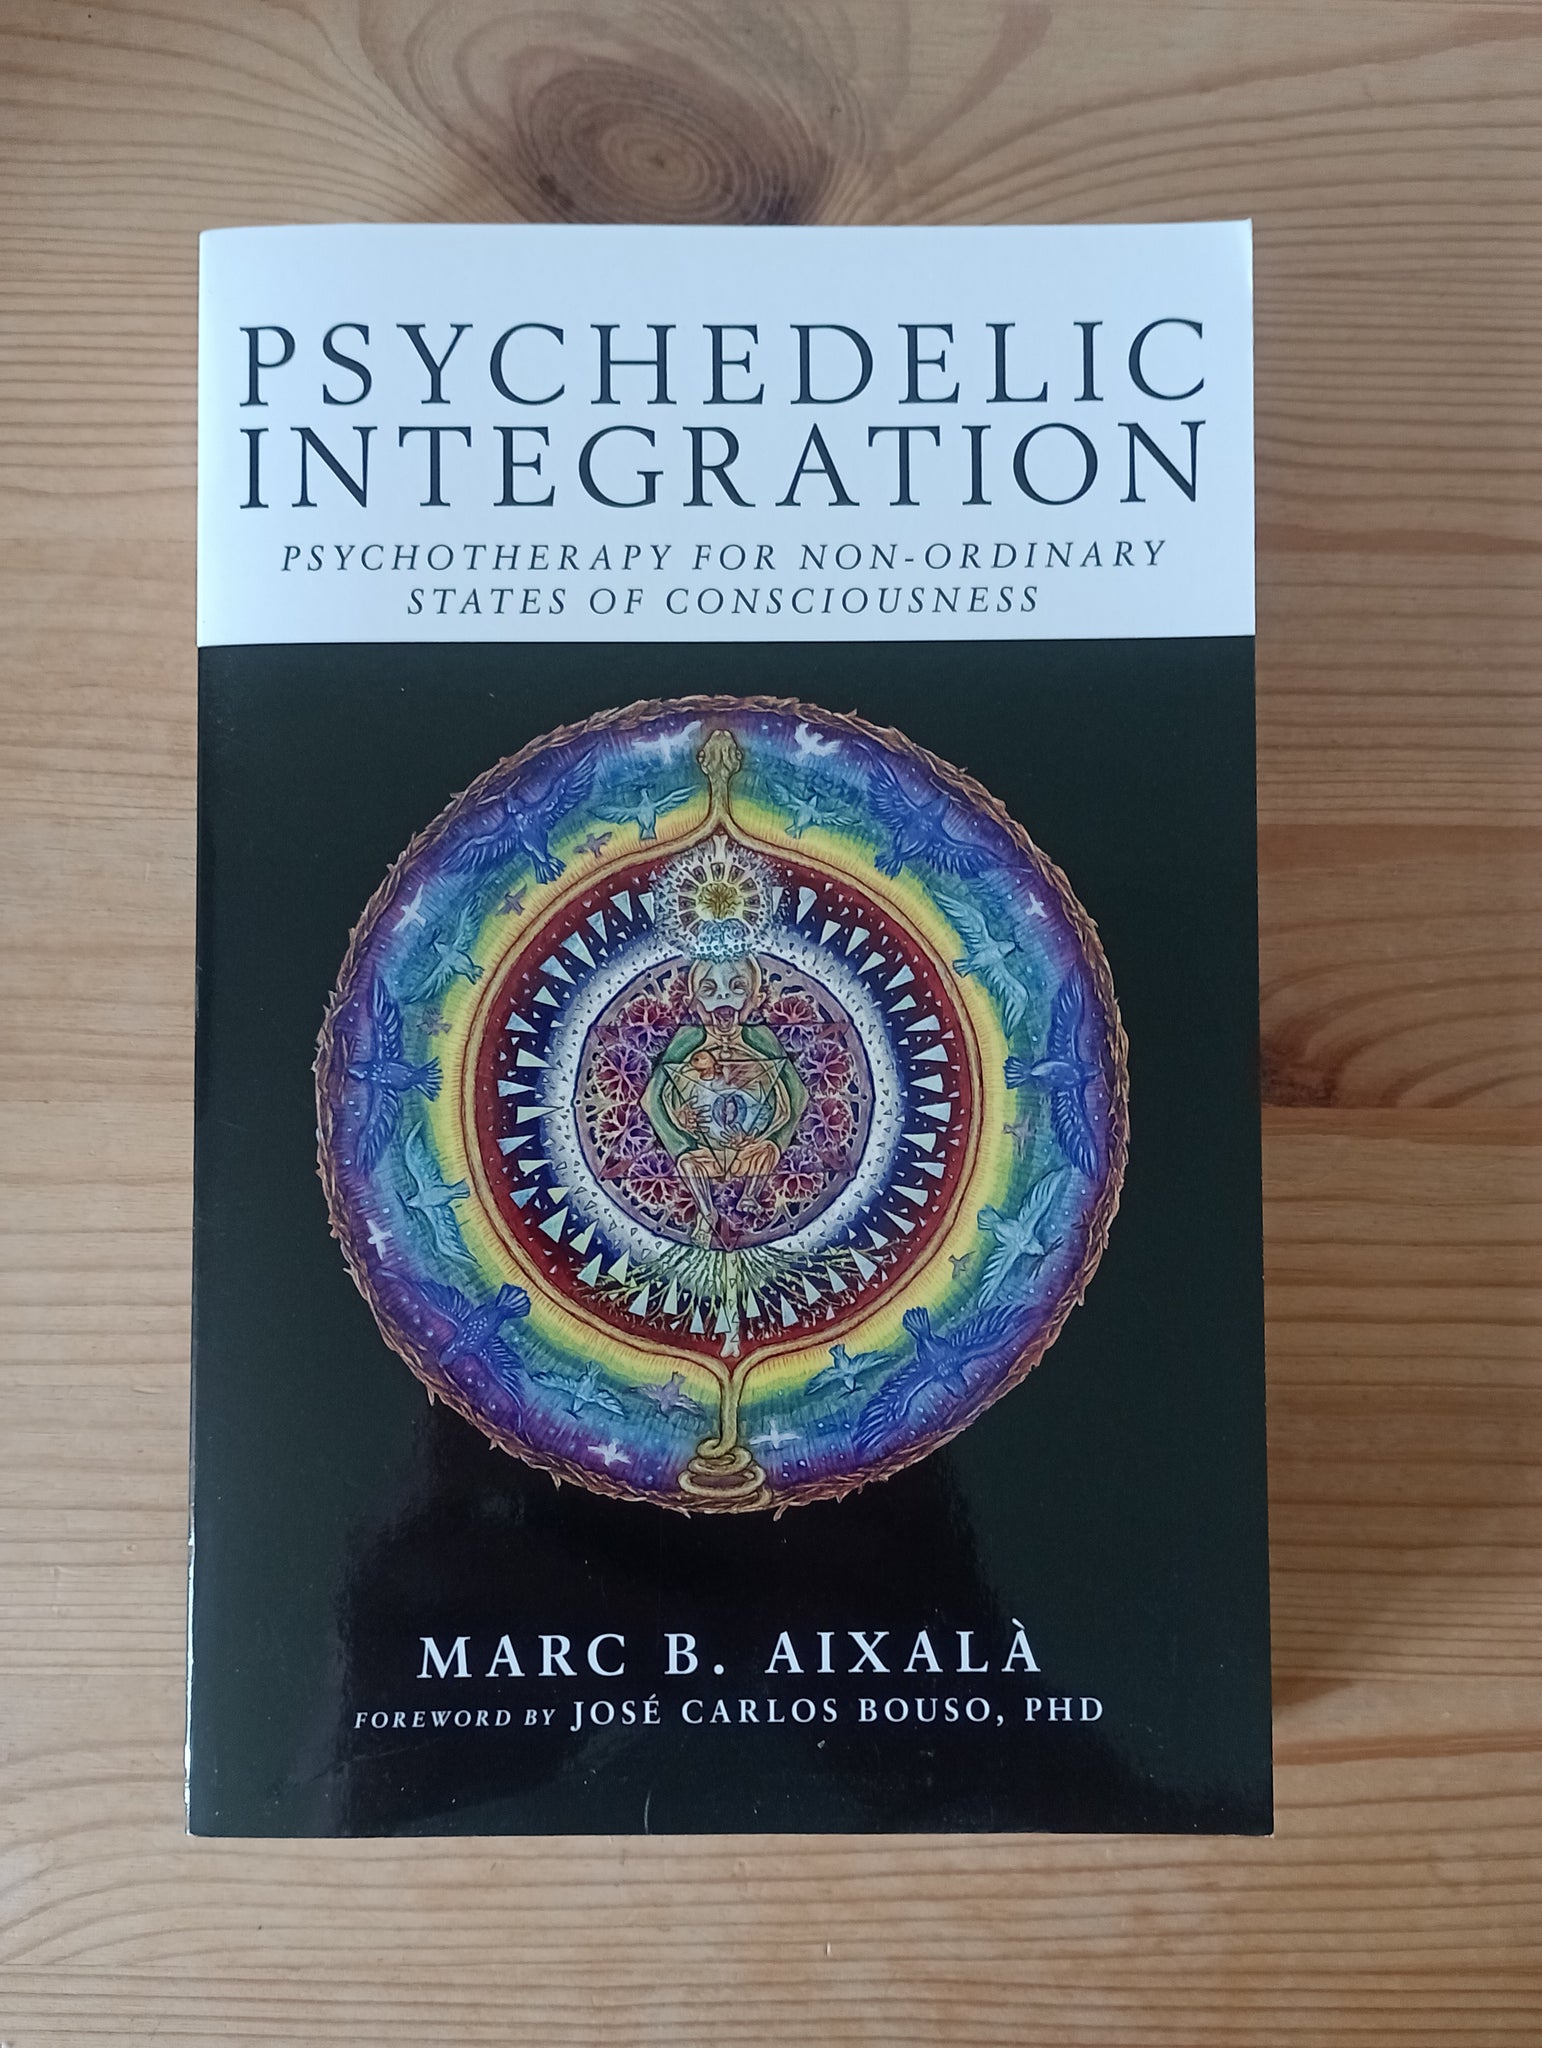 Psychedelic Integration (2022) by Marc B Aixala